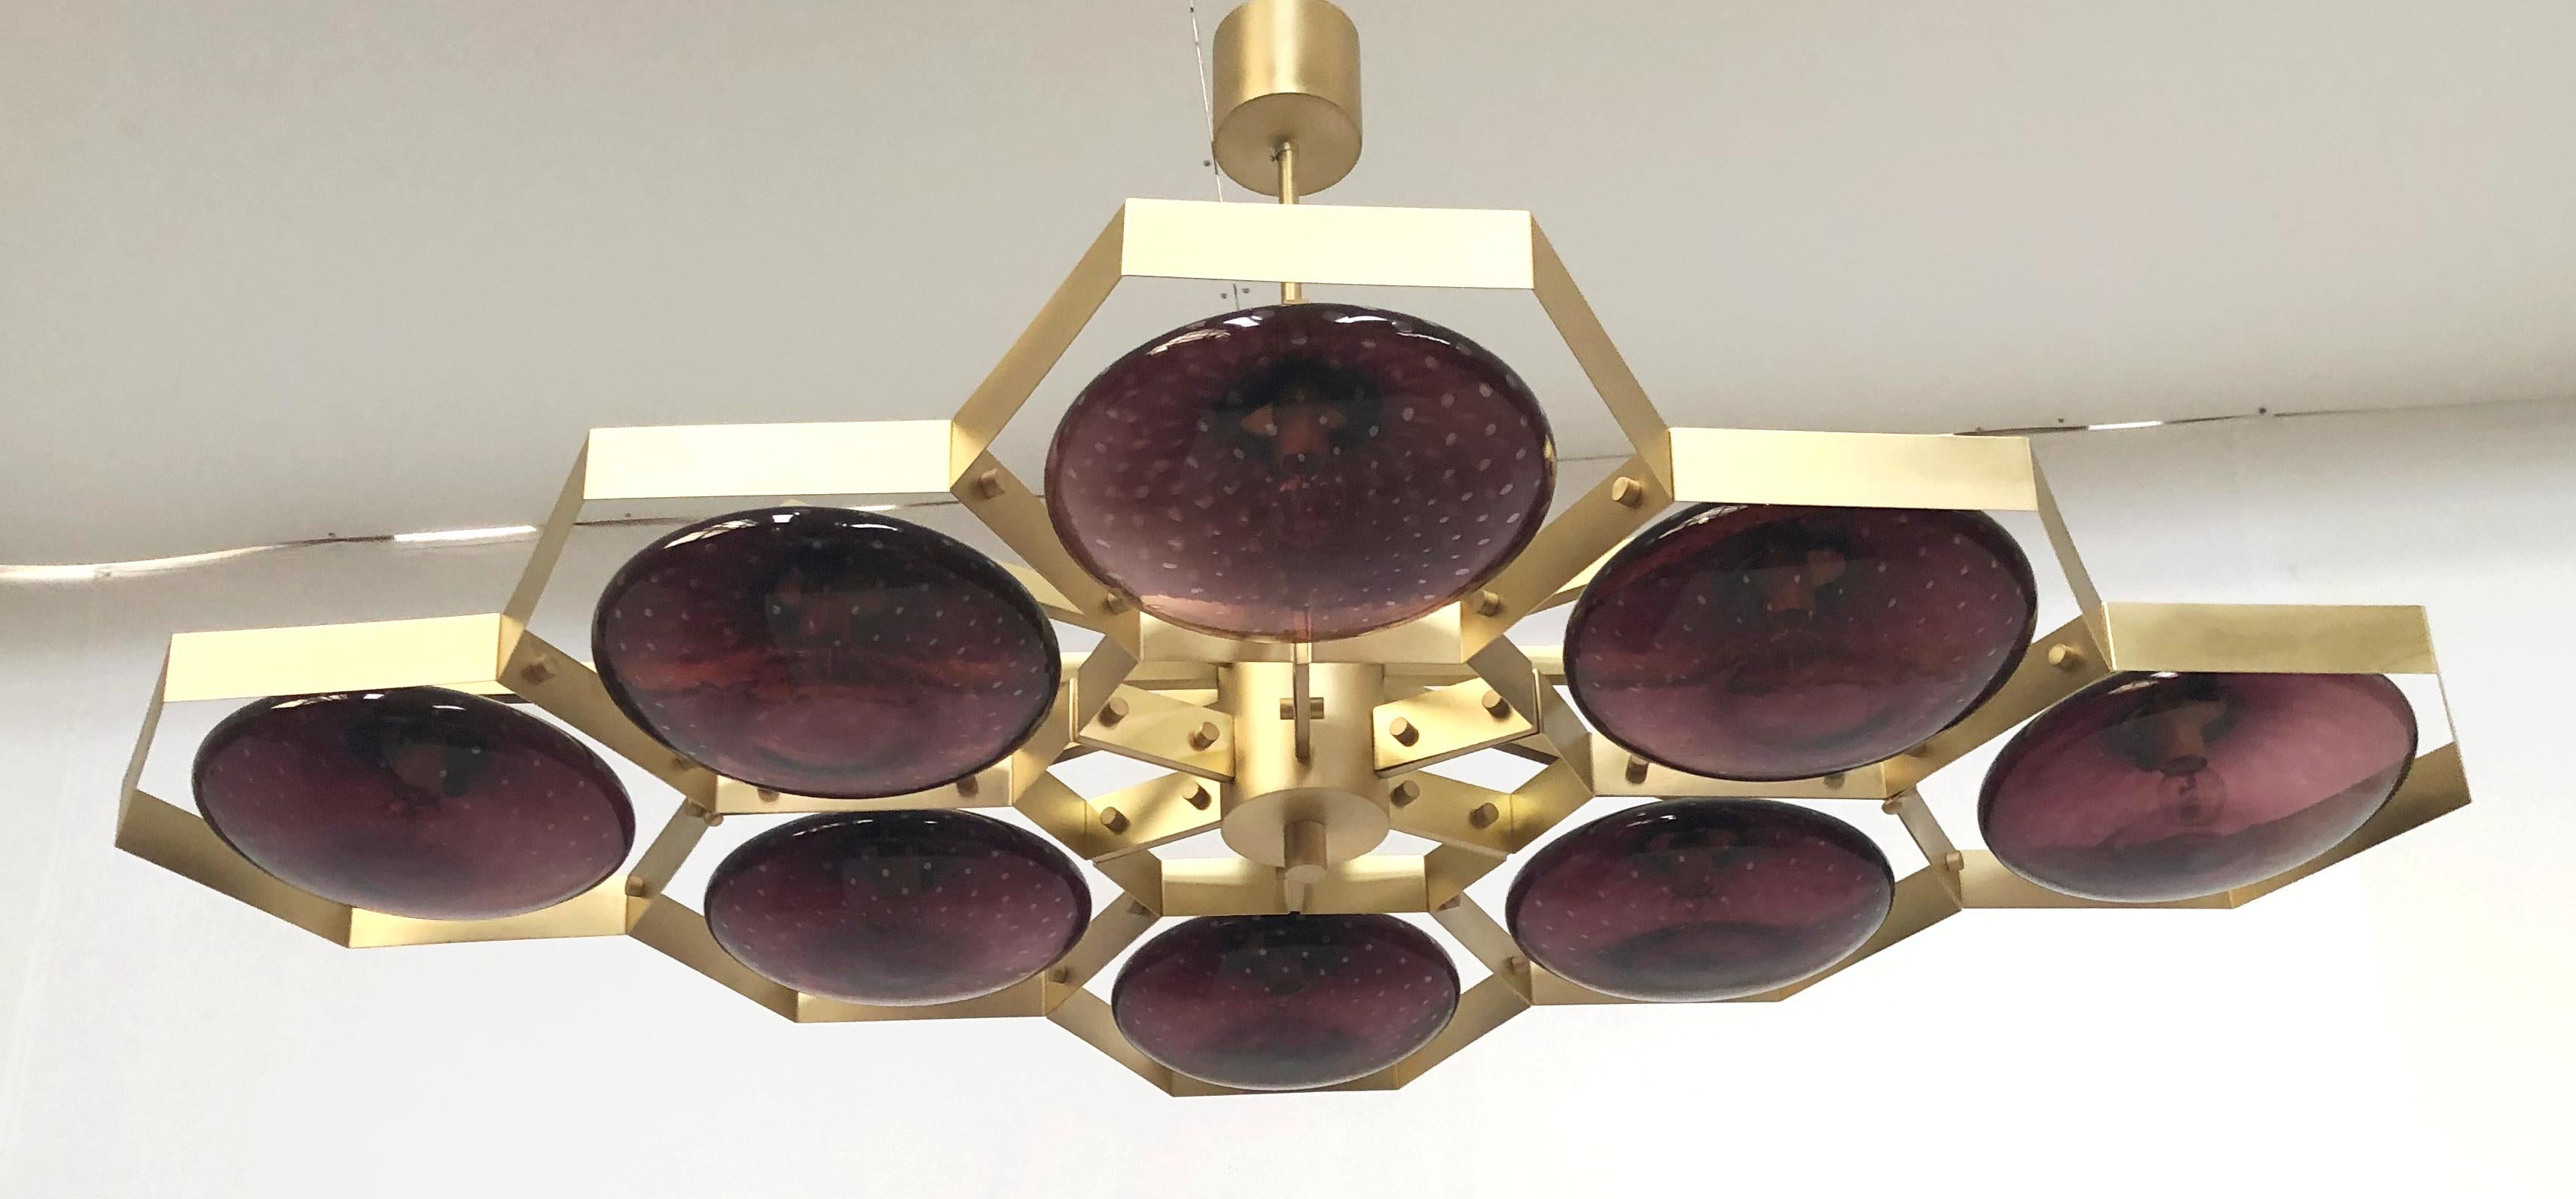 Italian chandelier with Murano glass shades mounted on solid brass frame / Made in Italy
Designed by Fabio Ltd, inspired by Angelo Lelli and Arredoluce styles
8 lights / E12 or E14 type / max 40W each
Length: 65 inches / Width: 42.5 inches / Height: